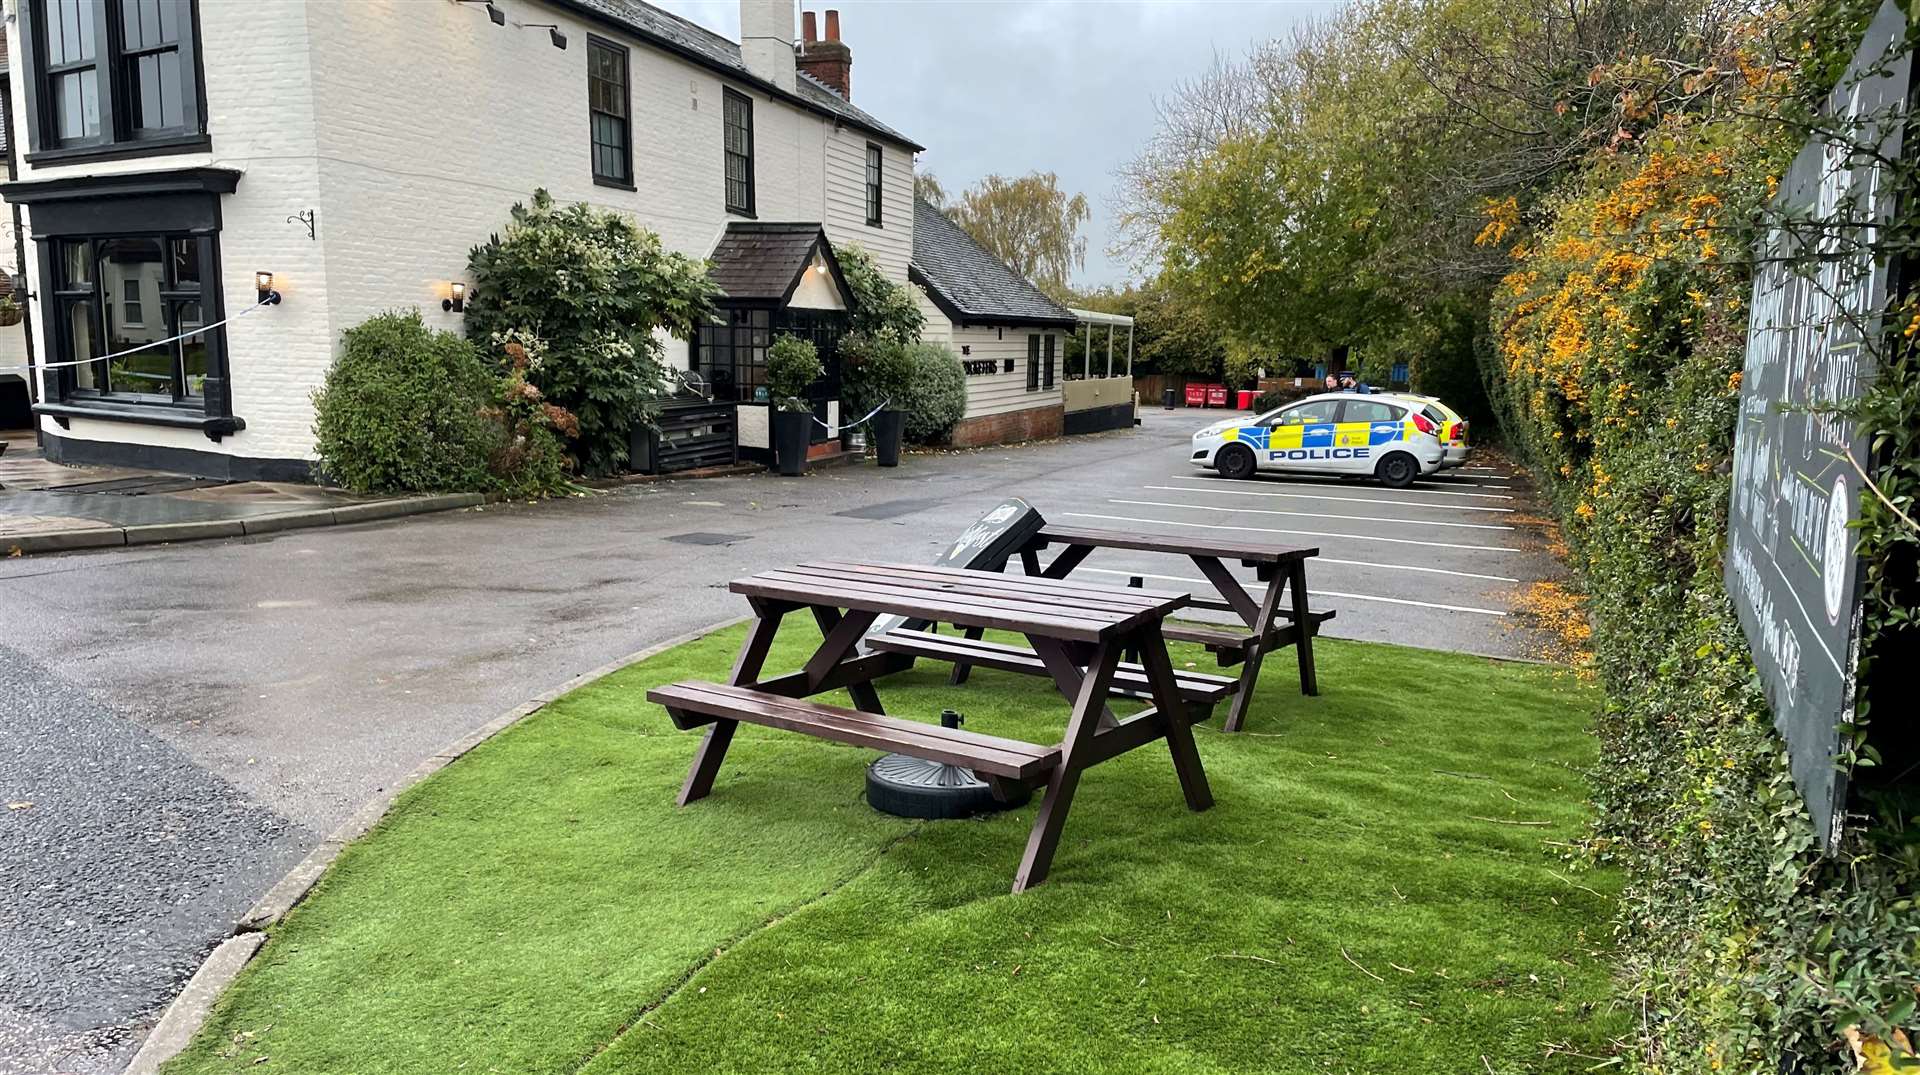 Police at the Cricketers Inn pub in Meopham where Craig Allen was killed.Miguel Batista, known as Alex Batista, is on trial accused of trying to murder pub landlord David Brown